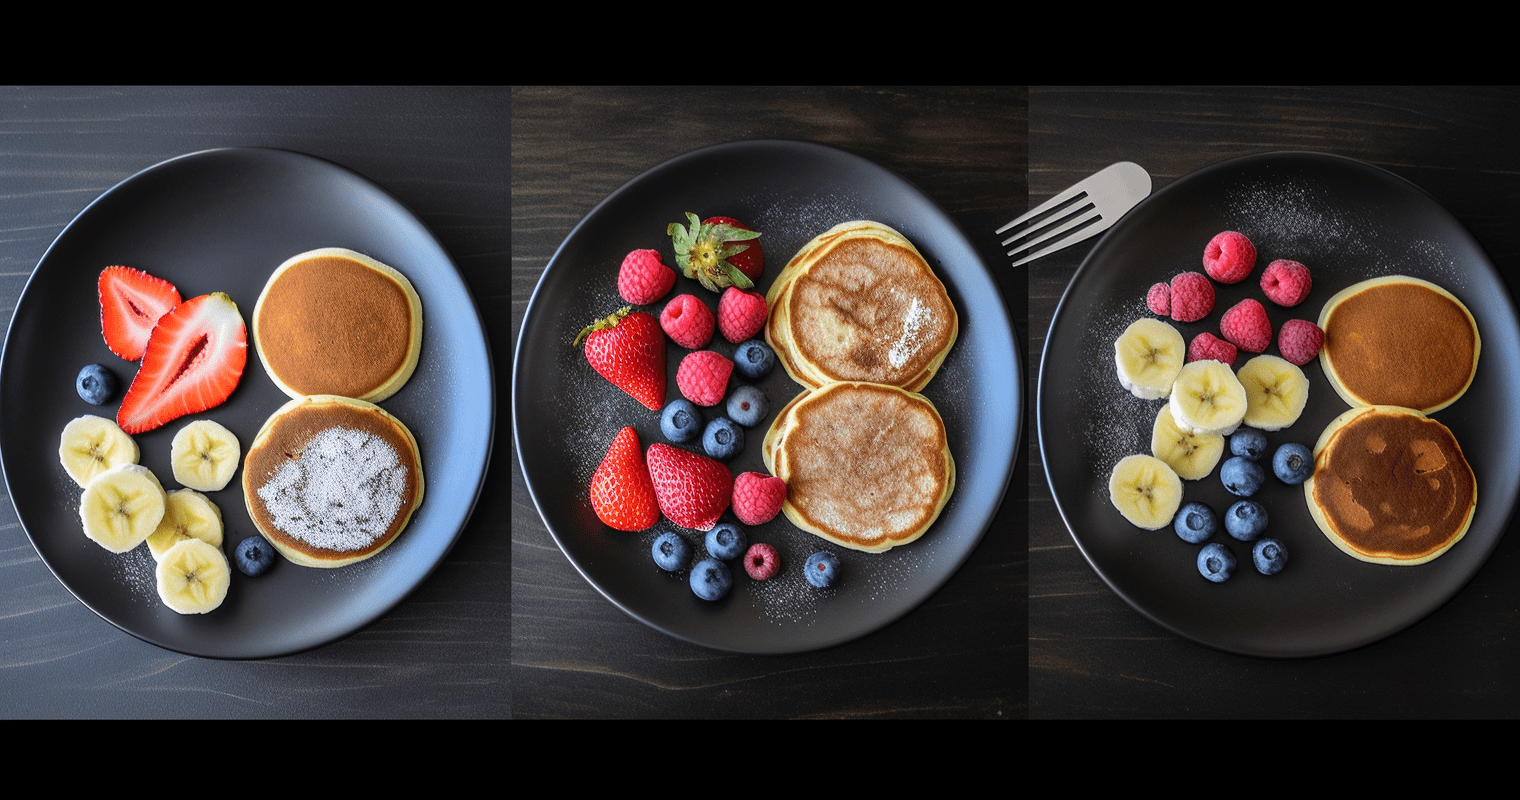 Delicious and Healthy Paleo Pancakes Recipe to Kickstart Your Morning